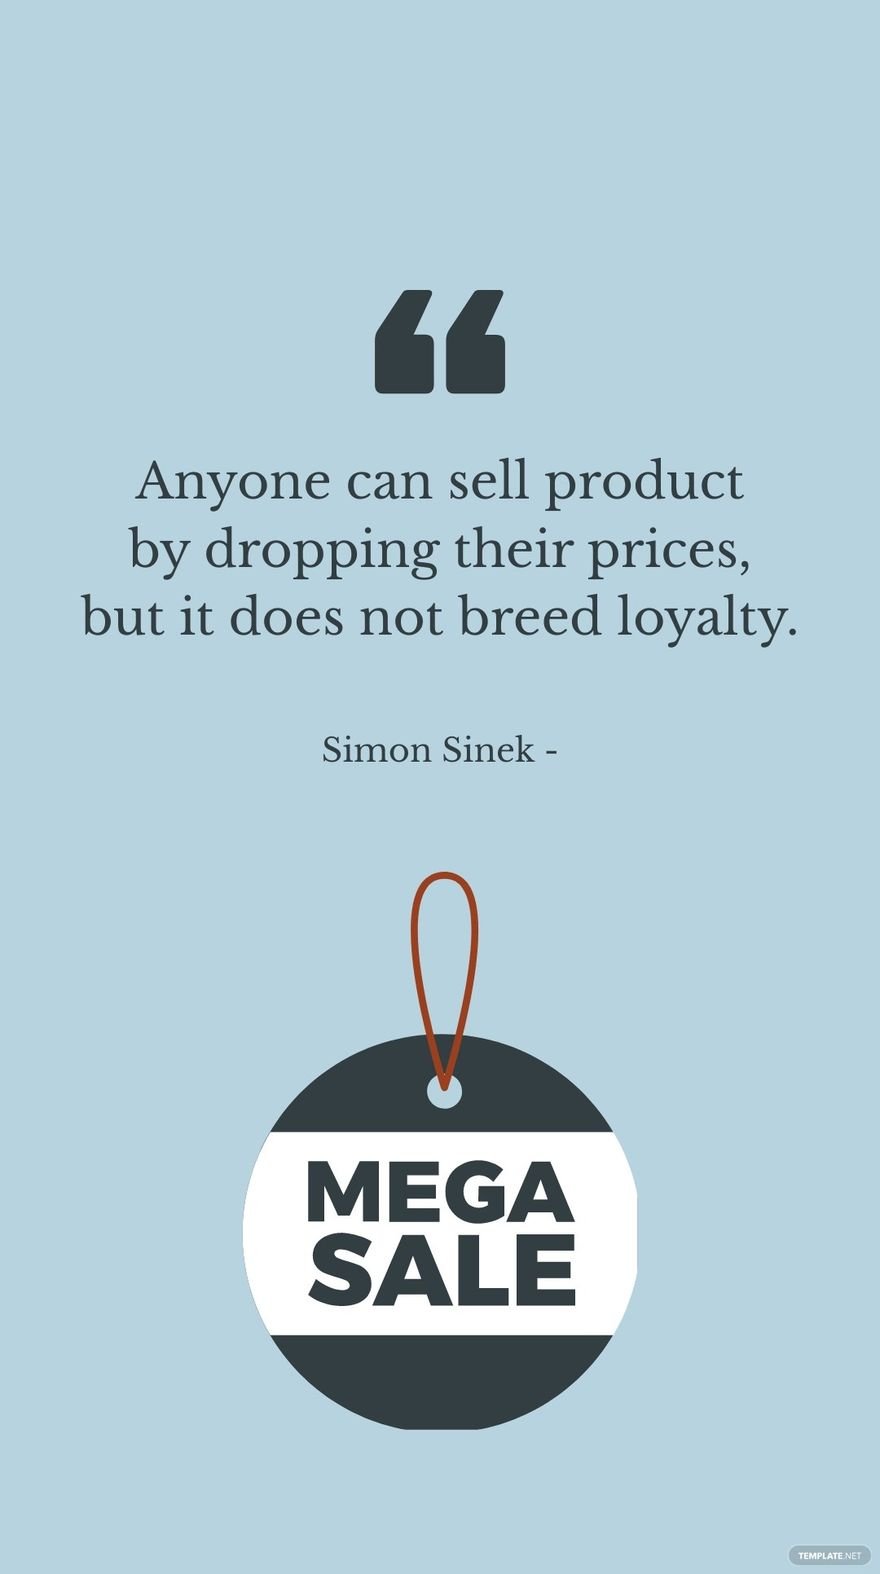 Simon Sinek - Anyone can sell product by dropping their prices, but it does not breed loyalty.